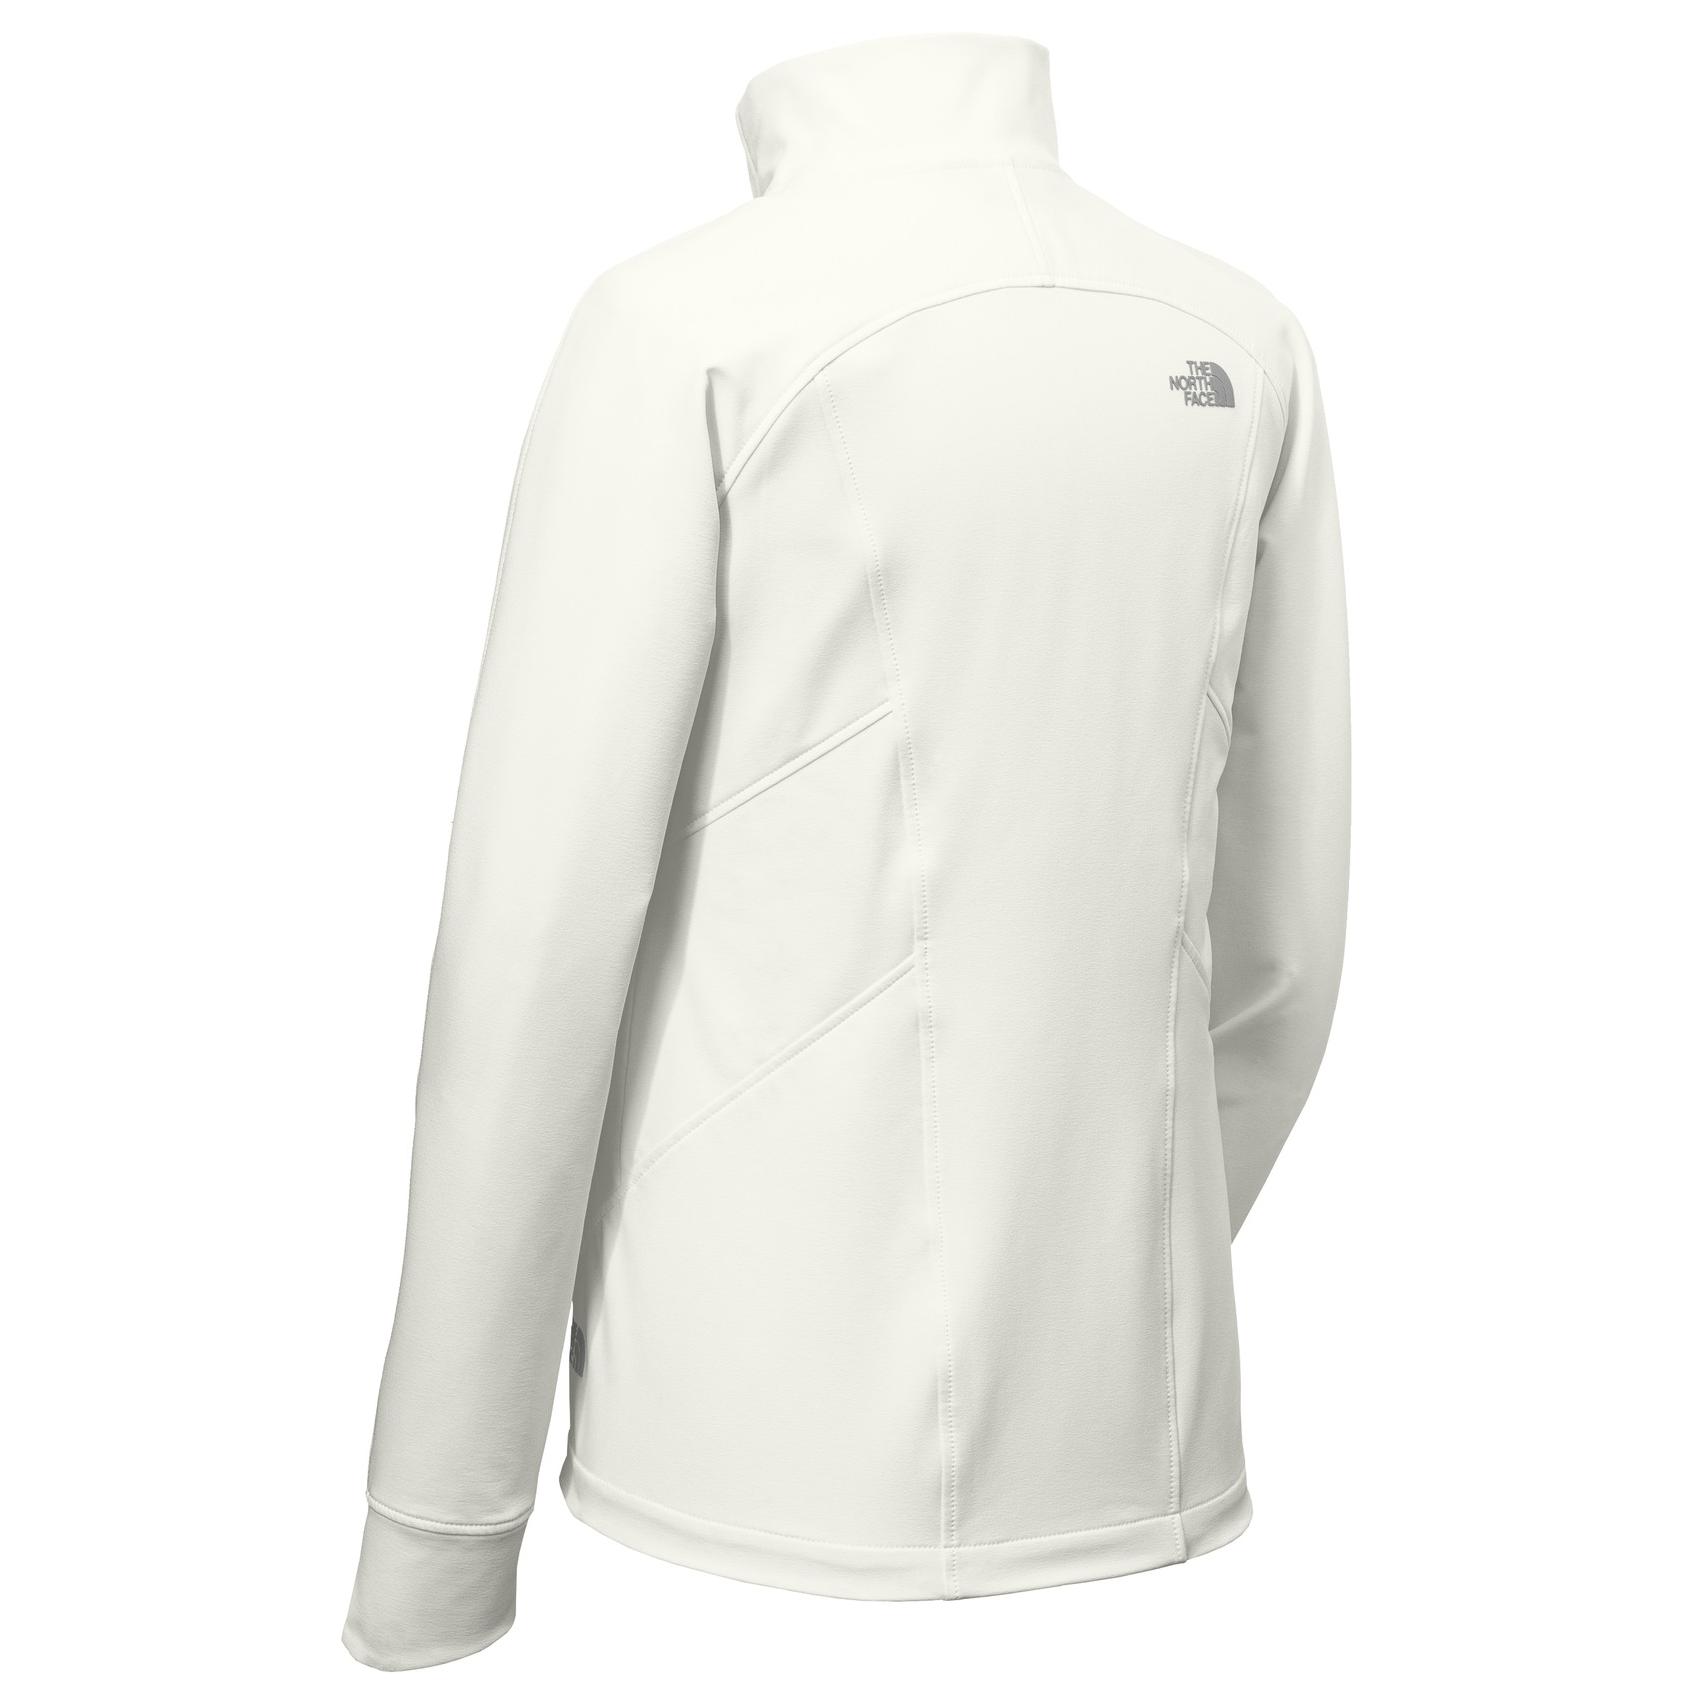 The North Face NF0A3LGW Ladies Tech Stretch Soft Shell Jacket - White | FullSource.com